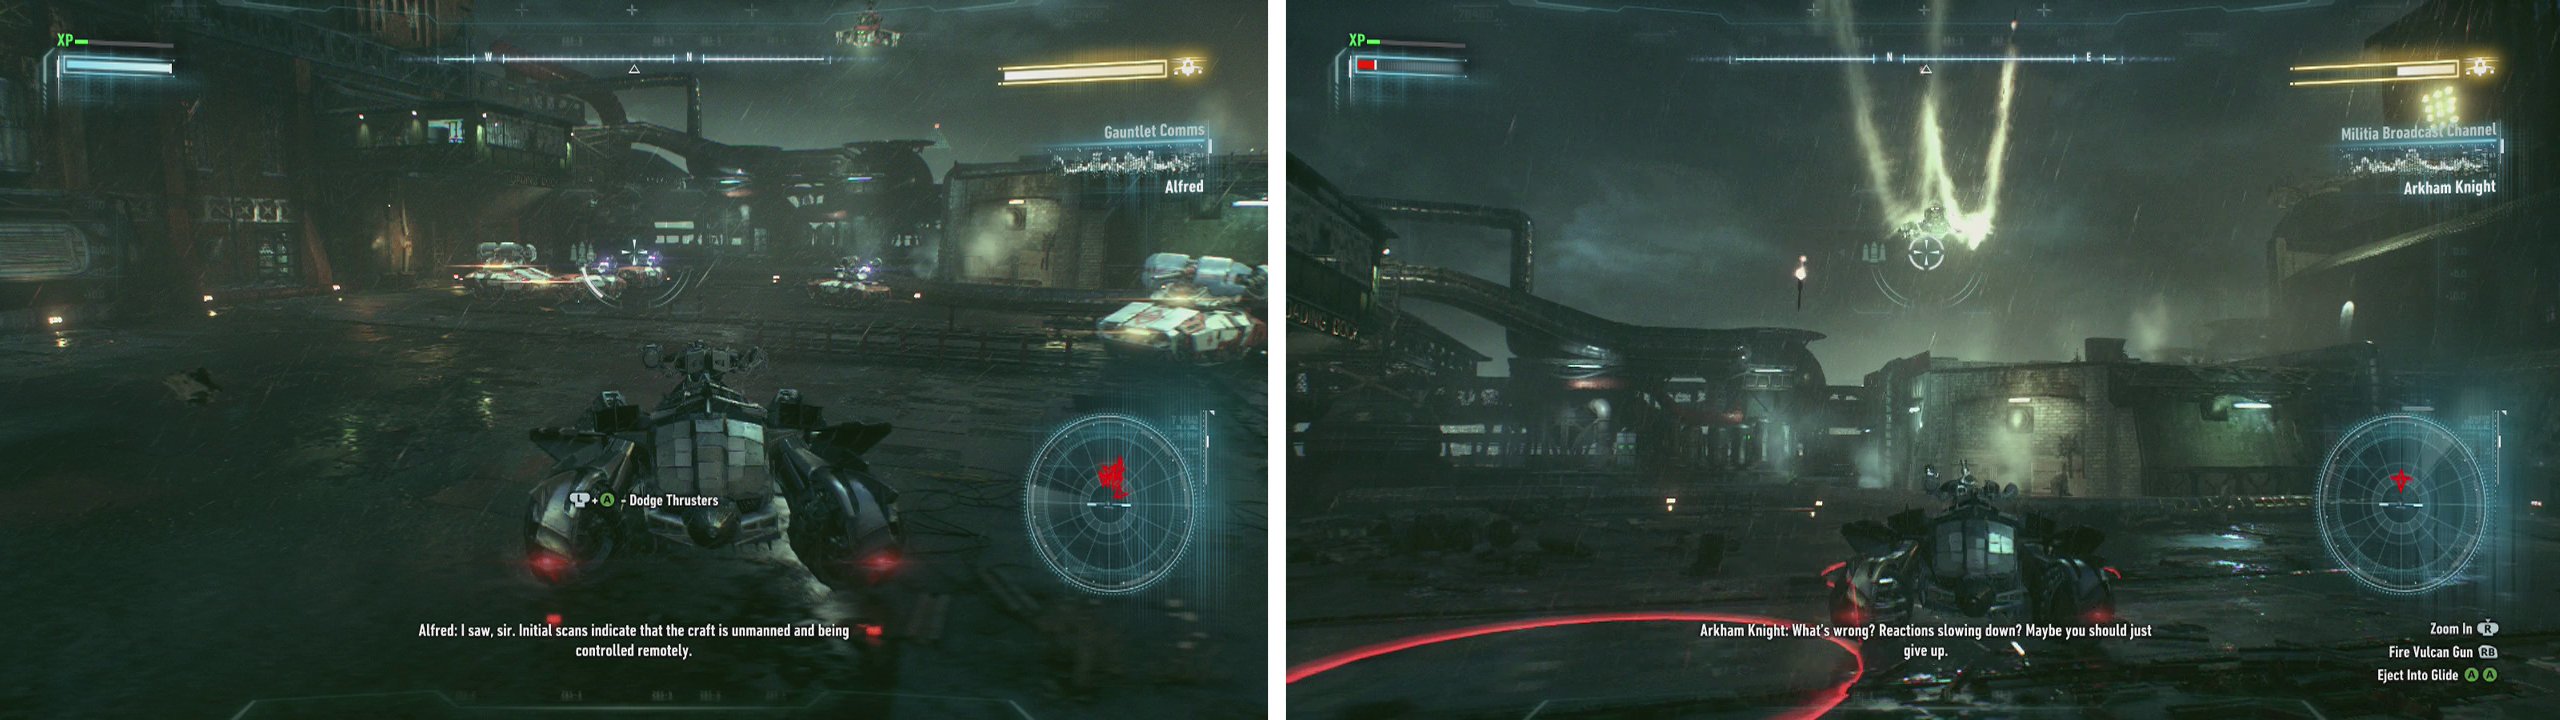 Defeat the Drone tanks (left) first before focusing on the Attack Helicopter (right).